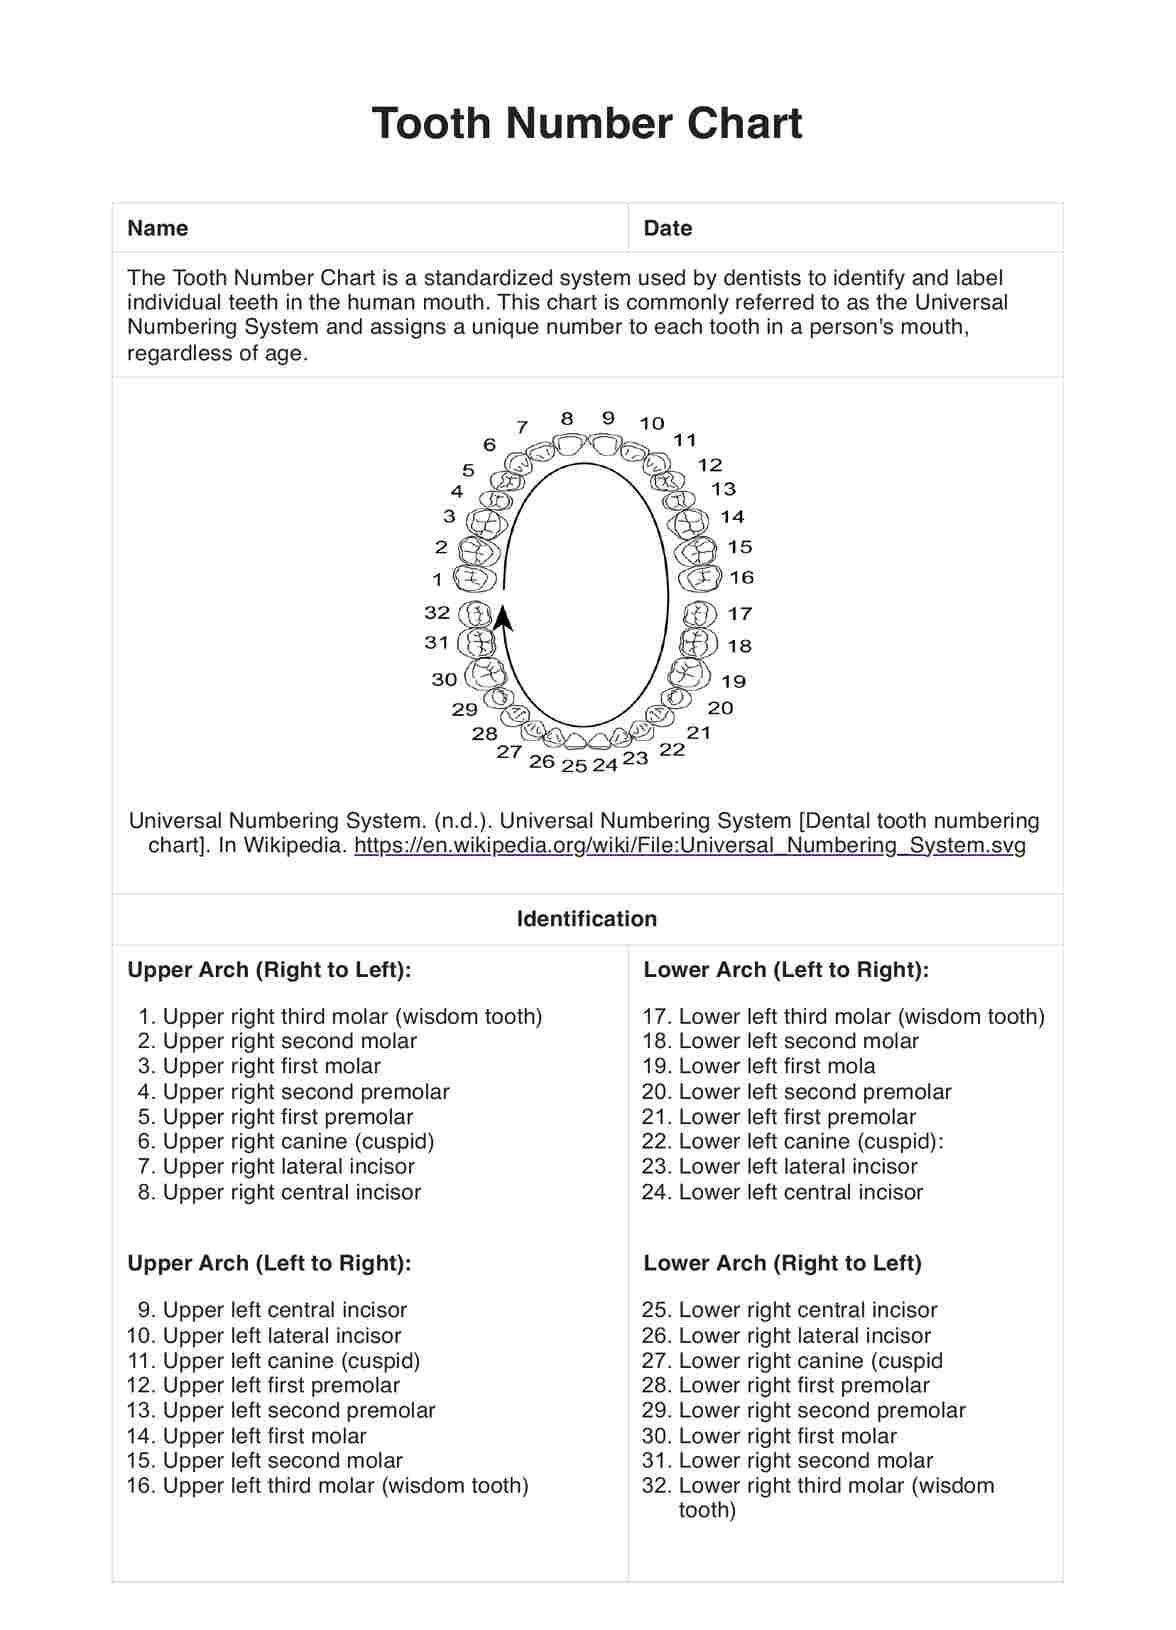 Tooth Number Charts PDF Example